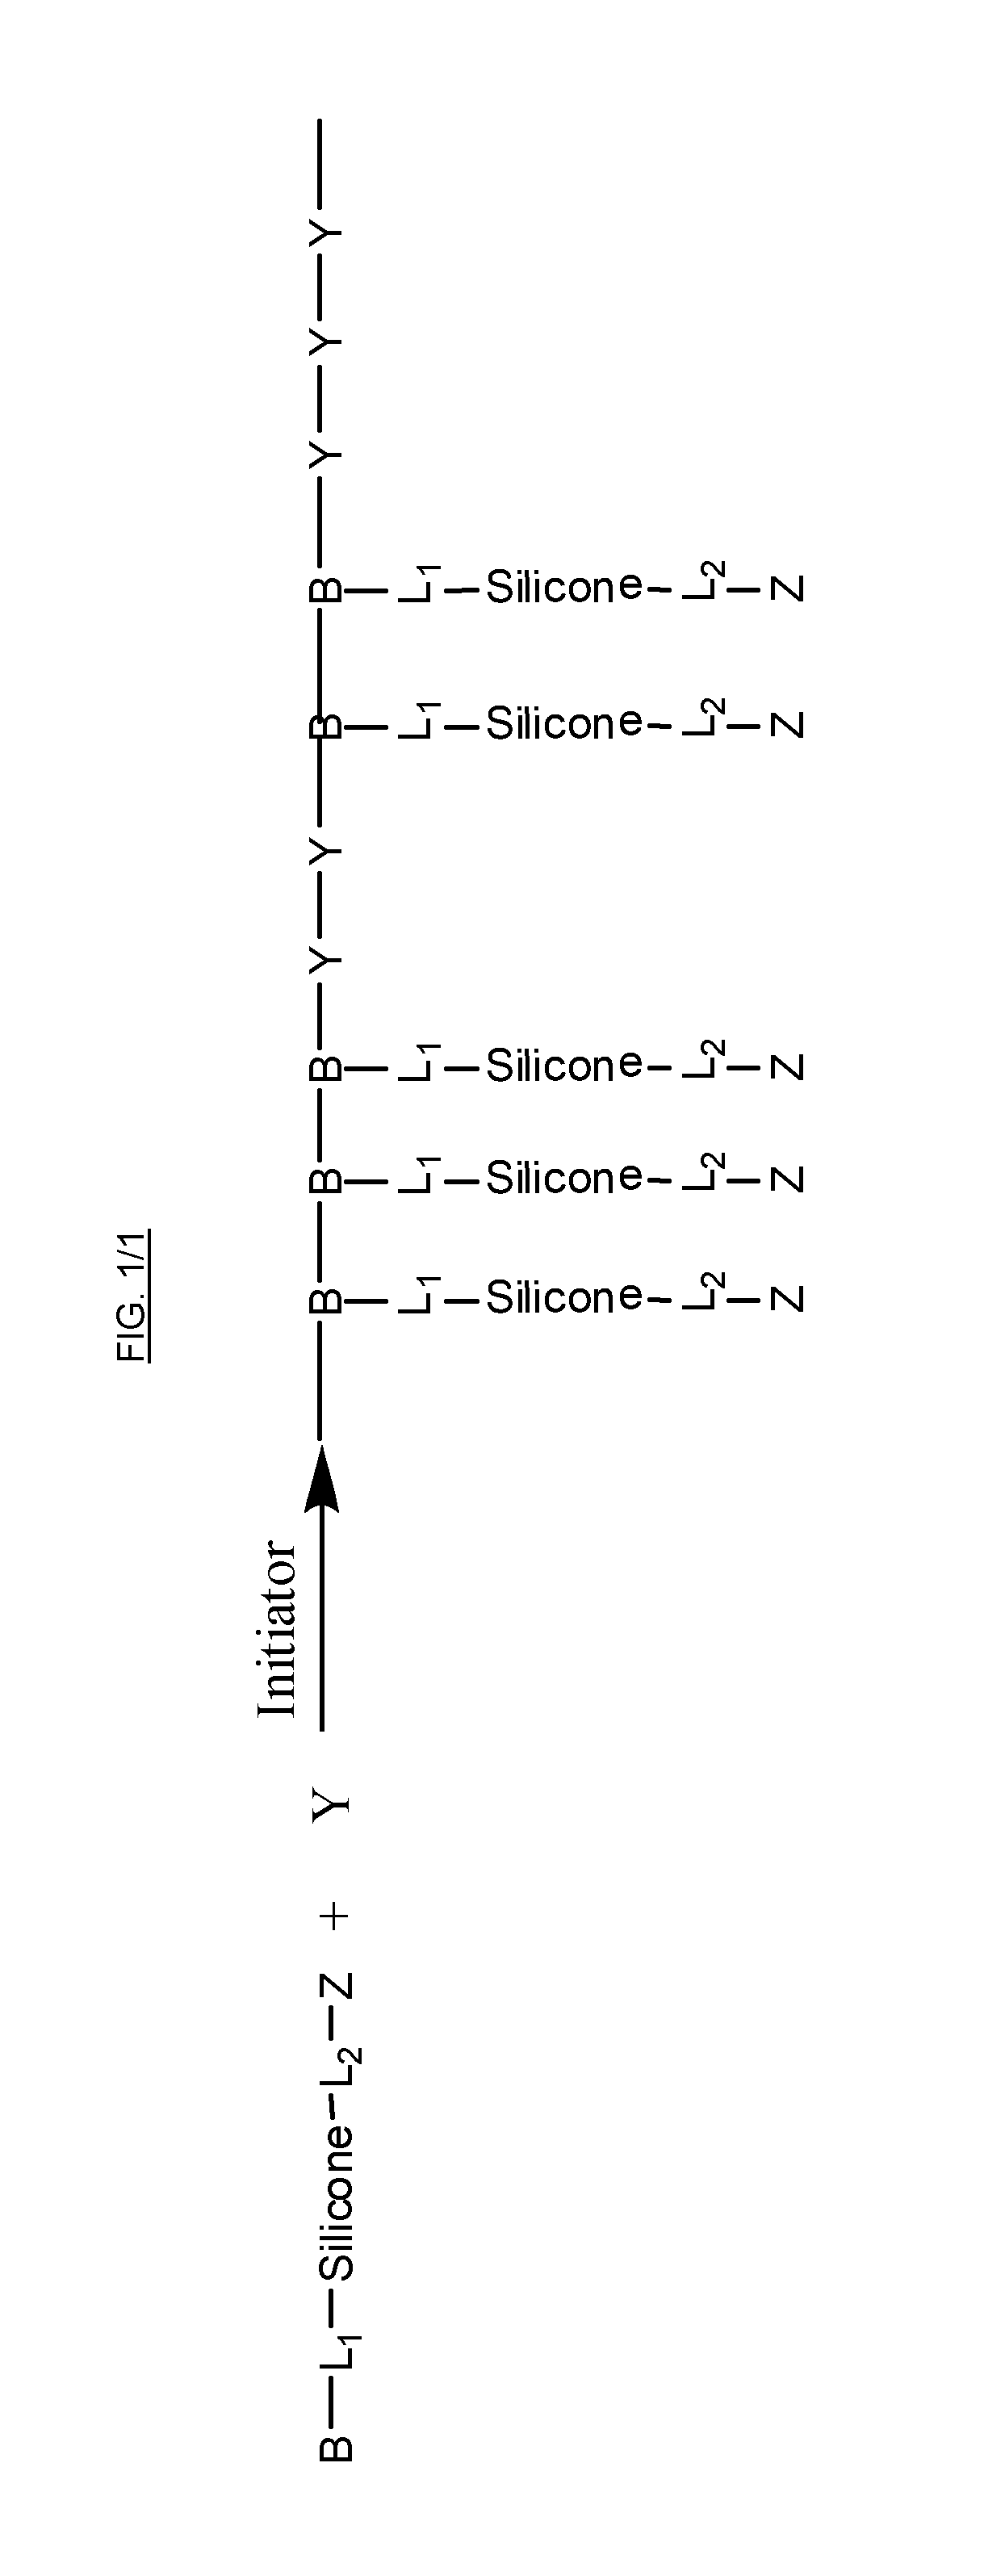 Silicone containing monomers with hydrophilic end groups